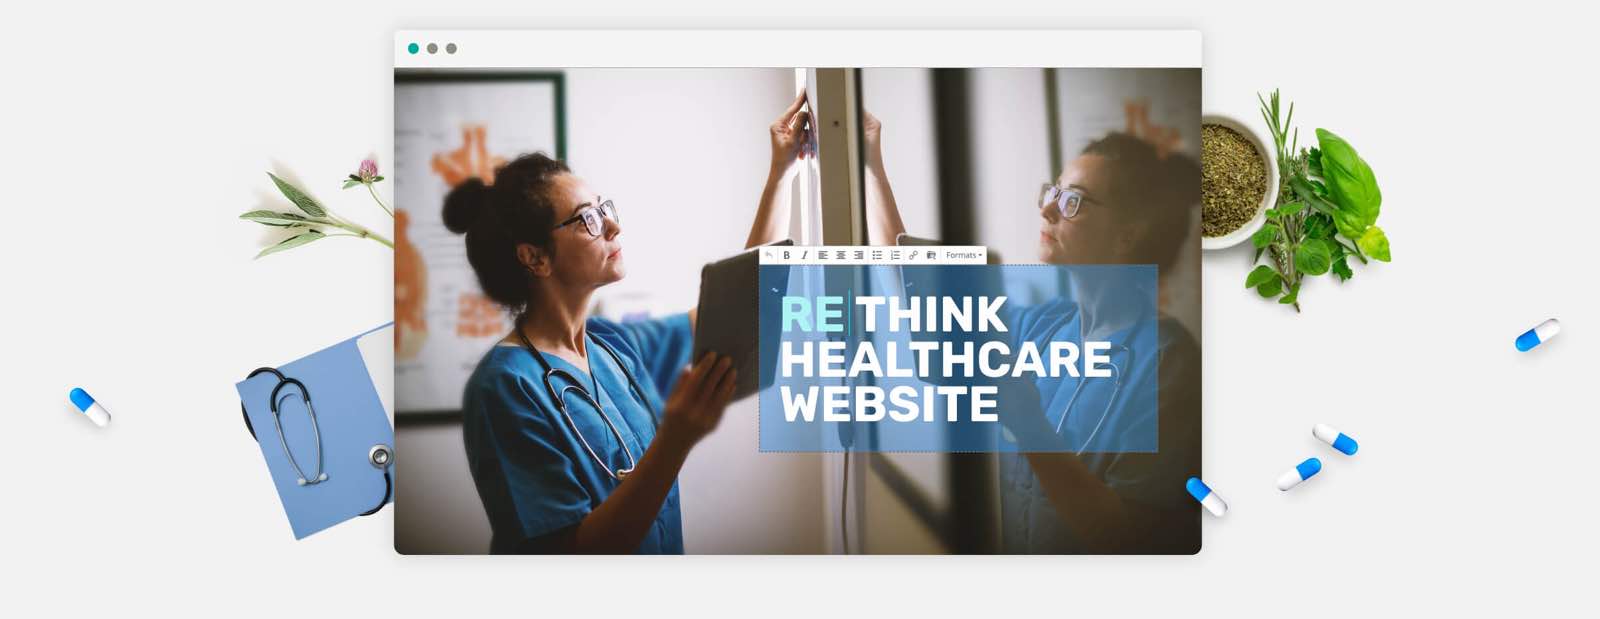 Morweb’s CMS will empower you to build a beautiful and trustworthy healthcare website.